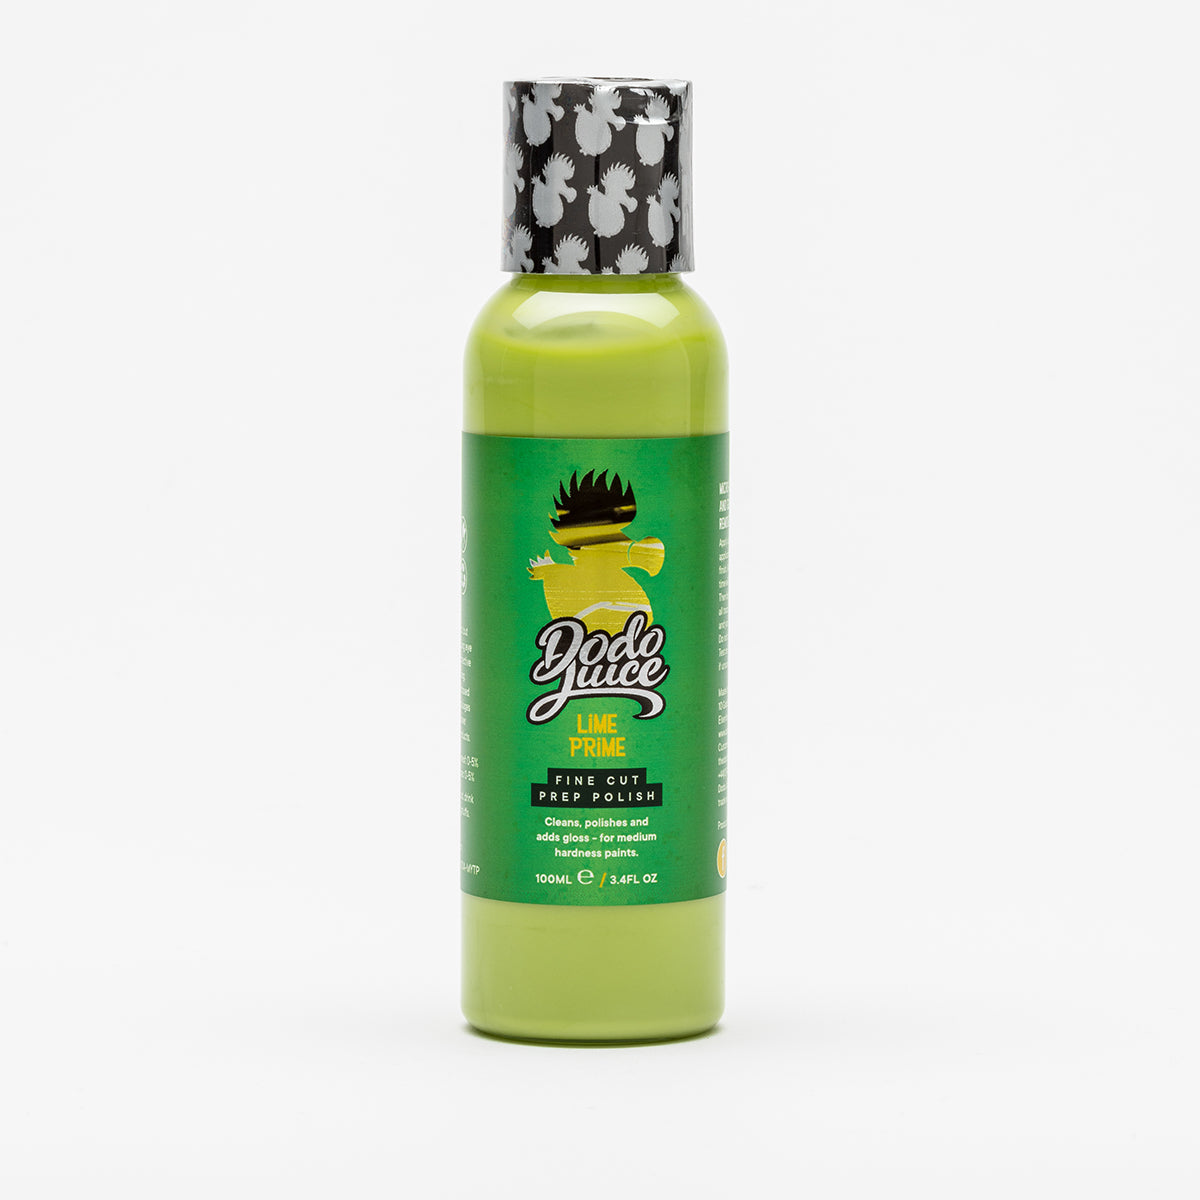 Lime Prime 100ml - fine cut polish and pre-wax cleanser (glovebox/sample size) HS 3405300000